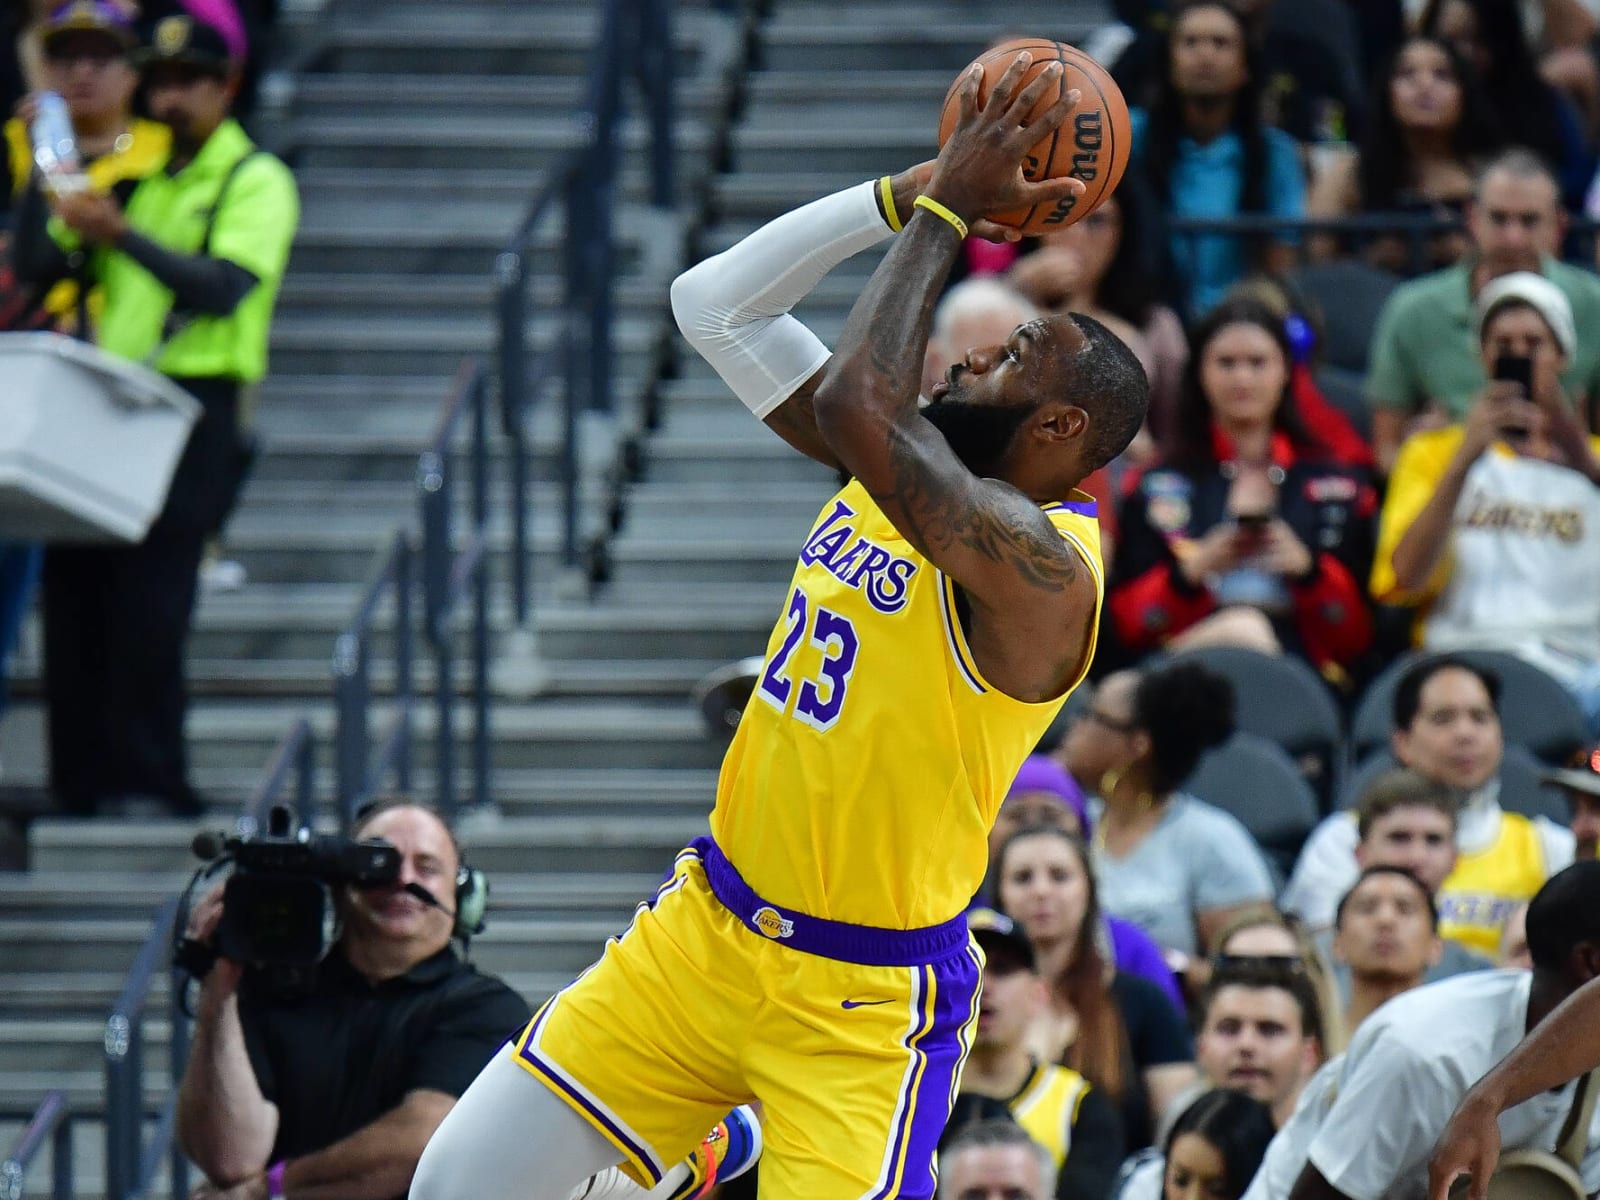 NBA Fans Adore LeBron James - NBA Icon Reacts to Viral Photo of His 'Ridiculous' Vertical Leap During Game Against SUN